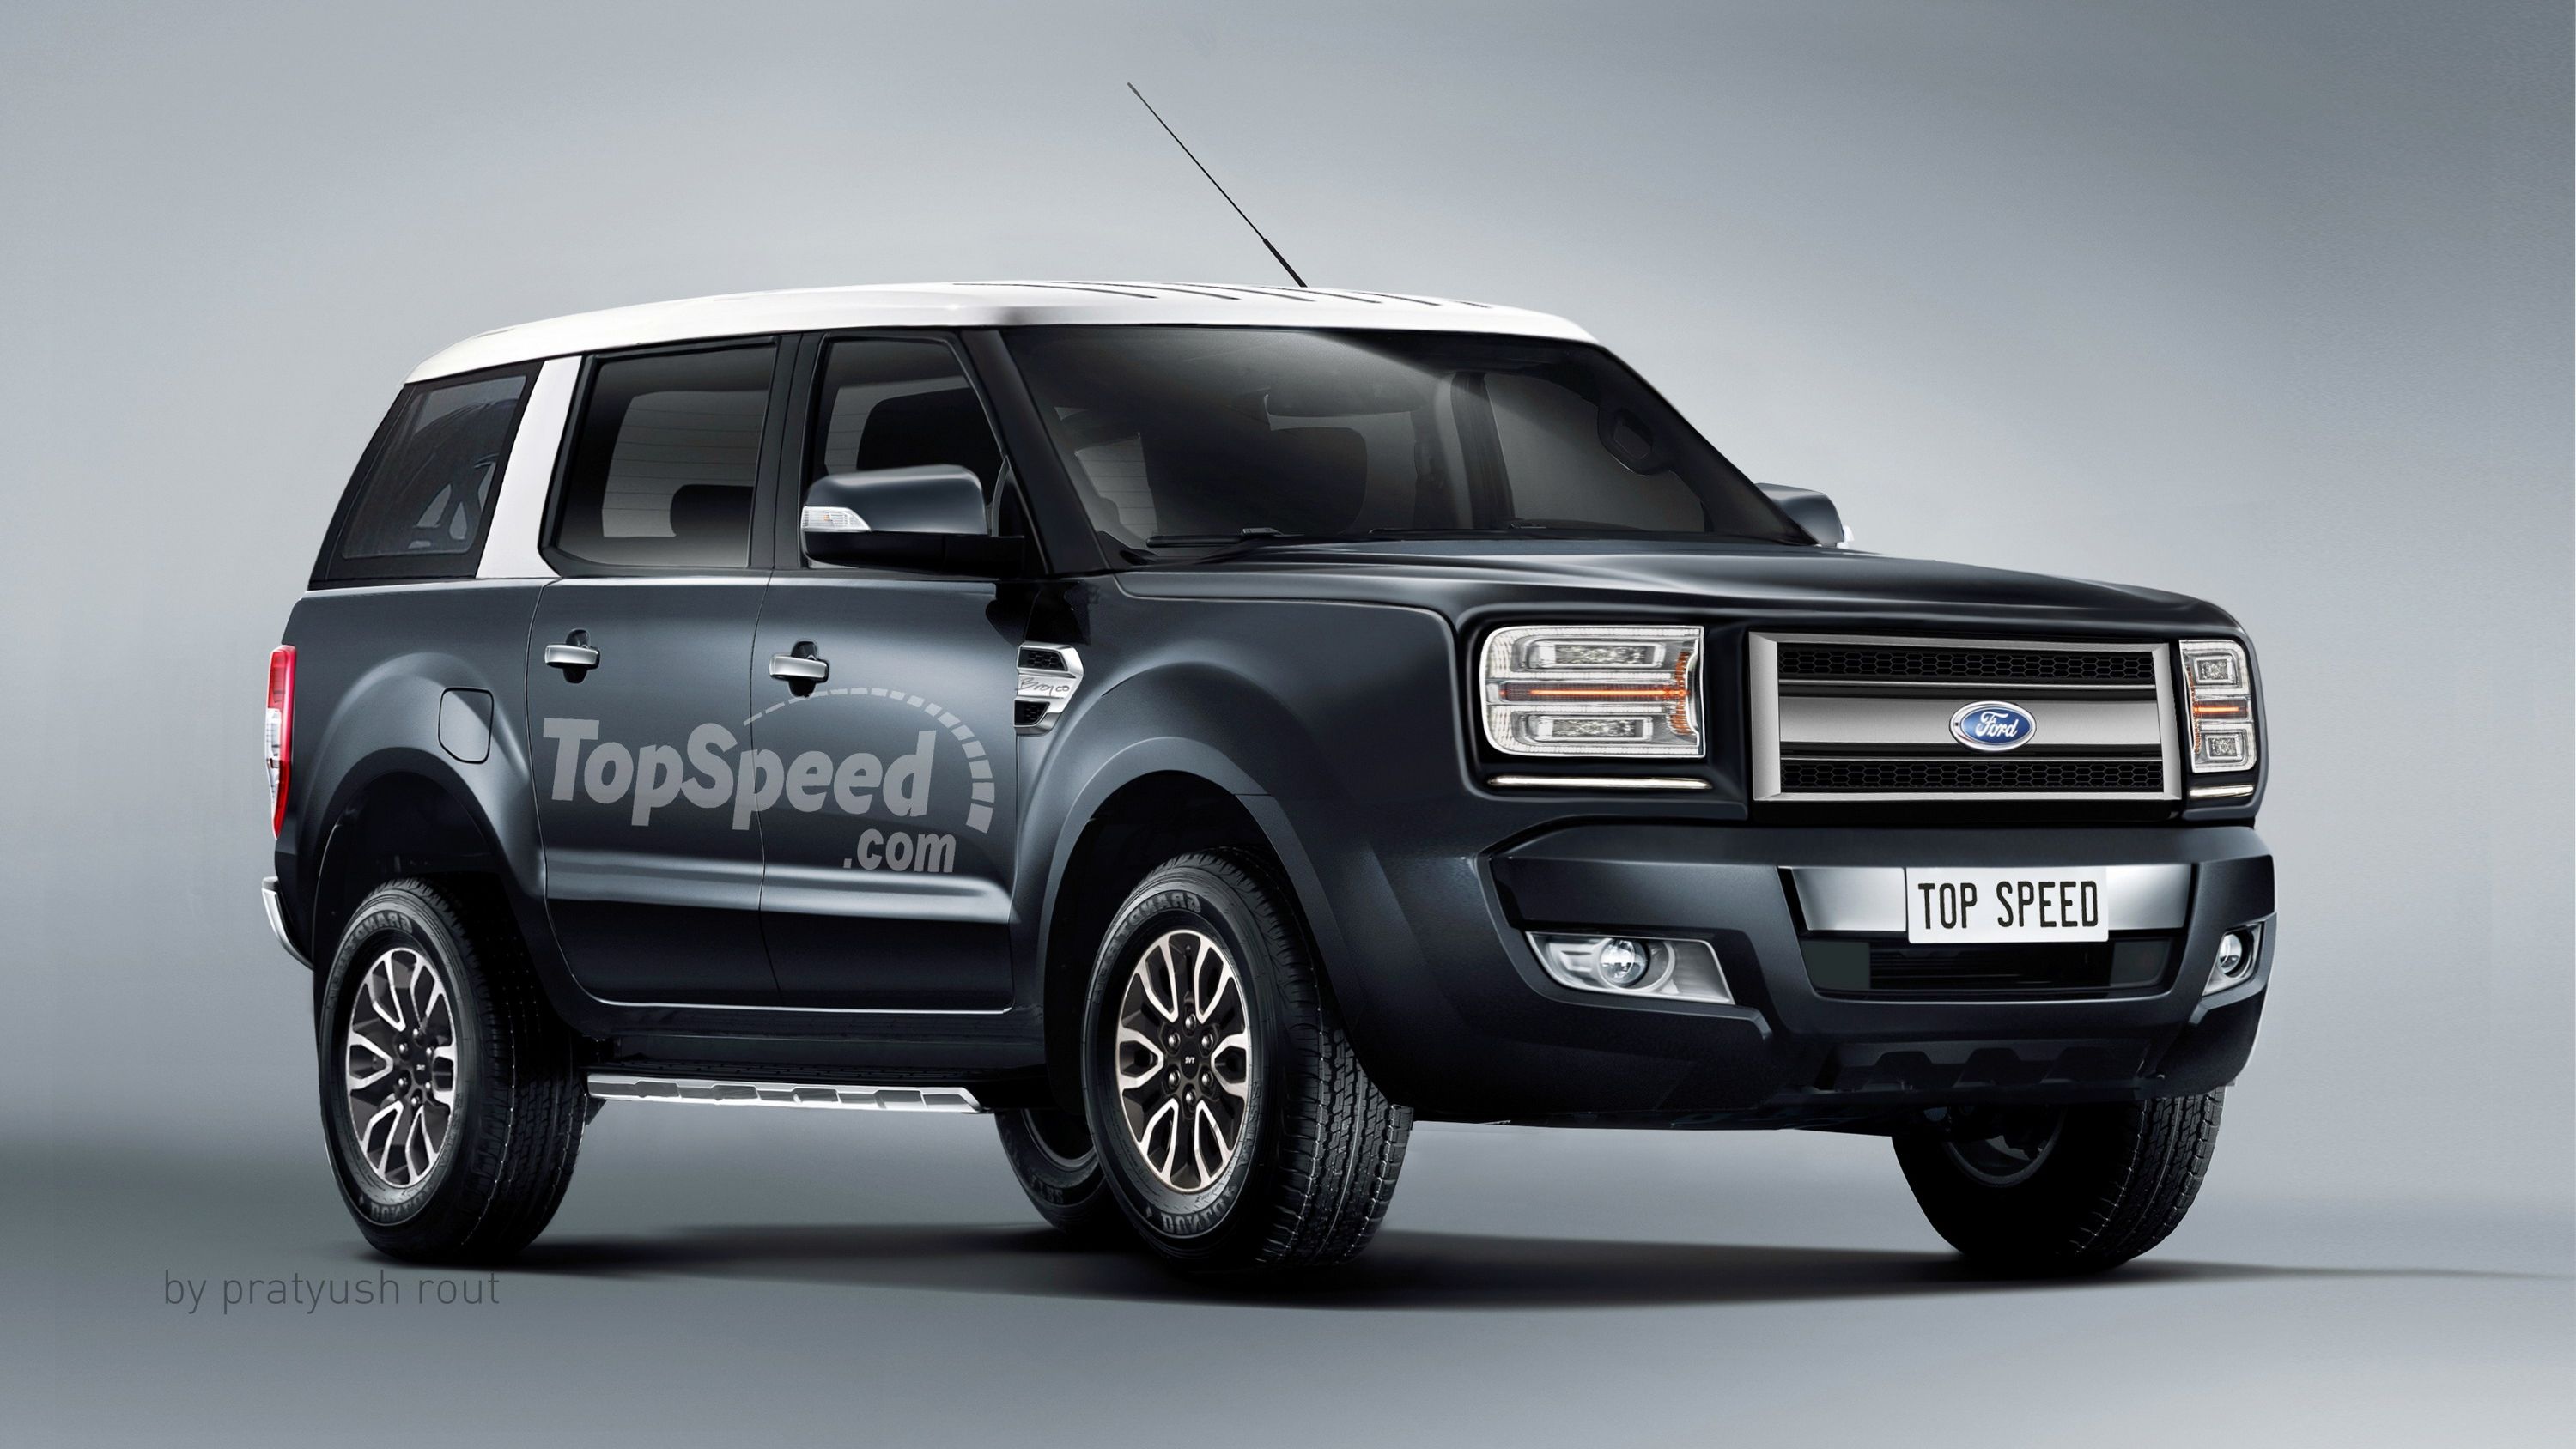 2018 Anonymous Ford Engineer Leaks Juicy Details about the Ford Bronco